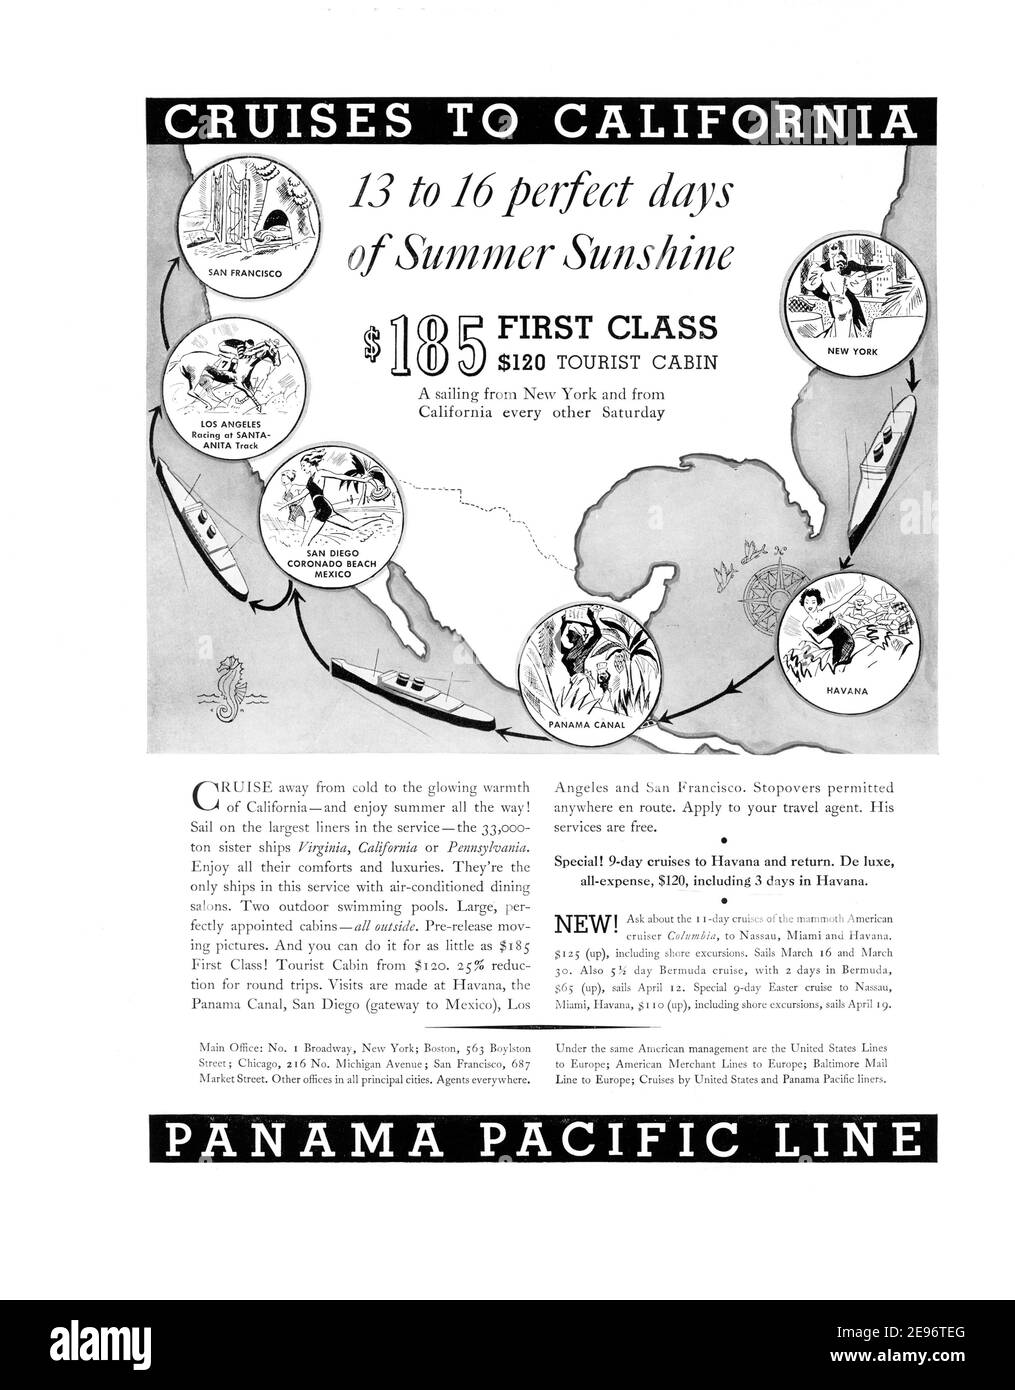 1935 Panama Pacific Line '13 to 16 Perfect Days of Summer Sunshine' Cruises to California Advertisement, retouched and revived, A3+, 600dpi Stock Photo